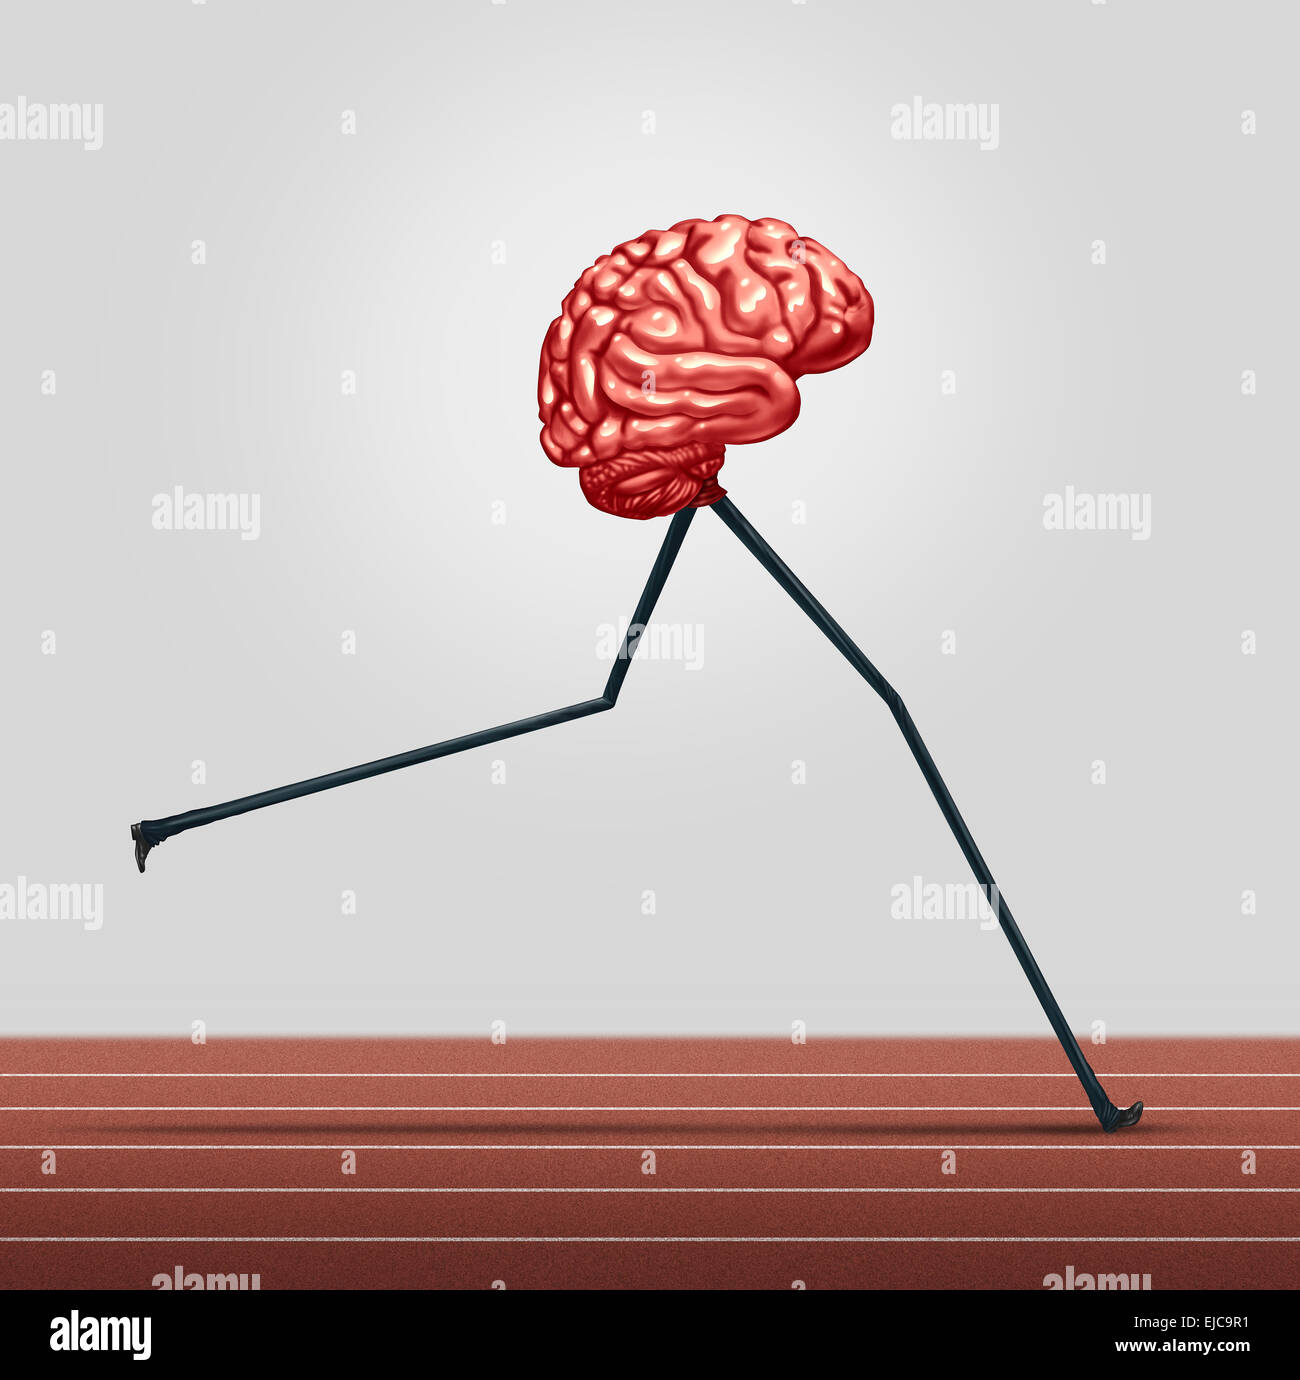 Fast brain and memory training concept as a human thinking organ with legs running on a track as a health care symbol for neurological fitness and cerebral wellbeing. Stock Photo